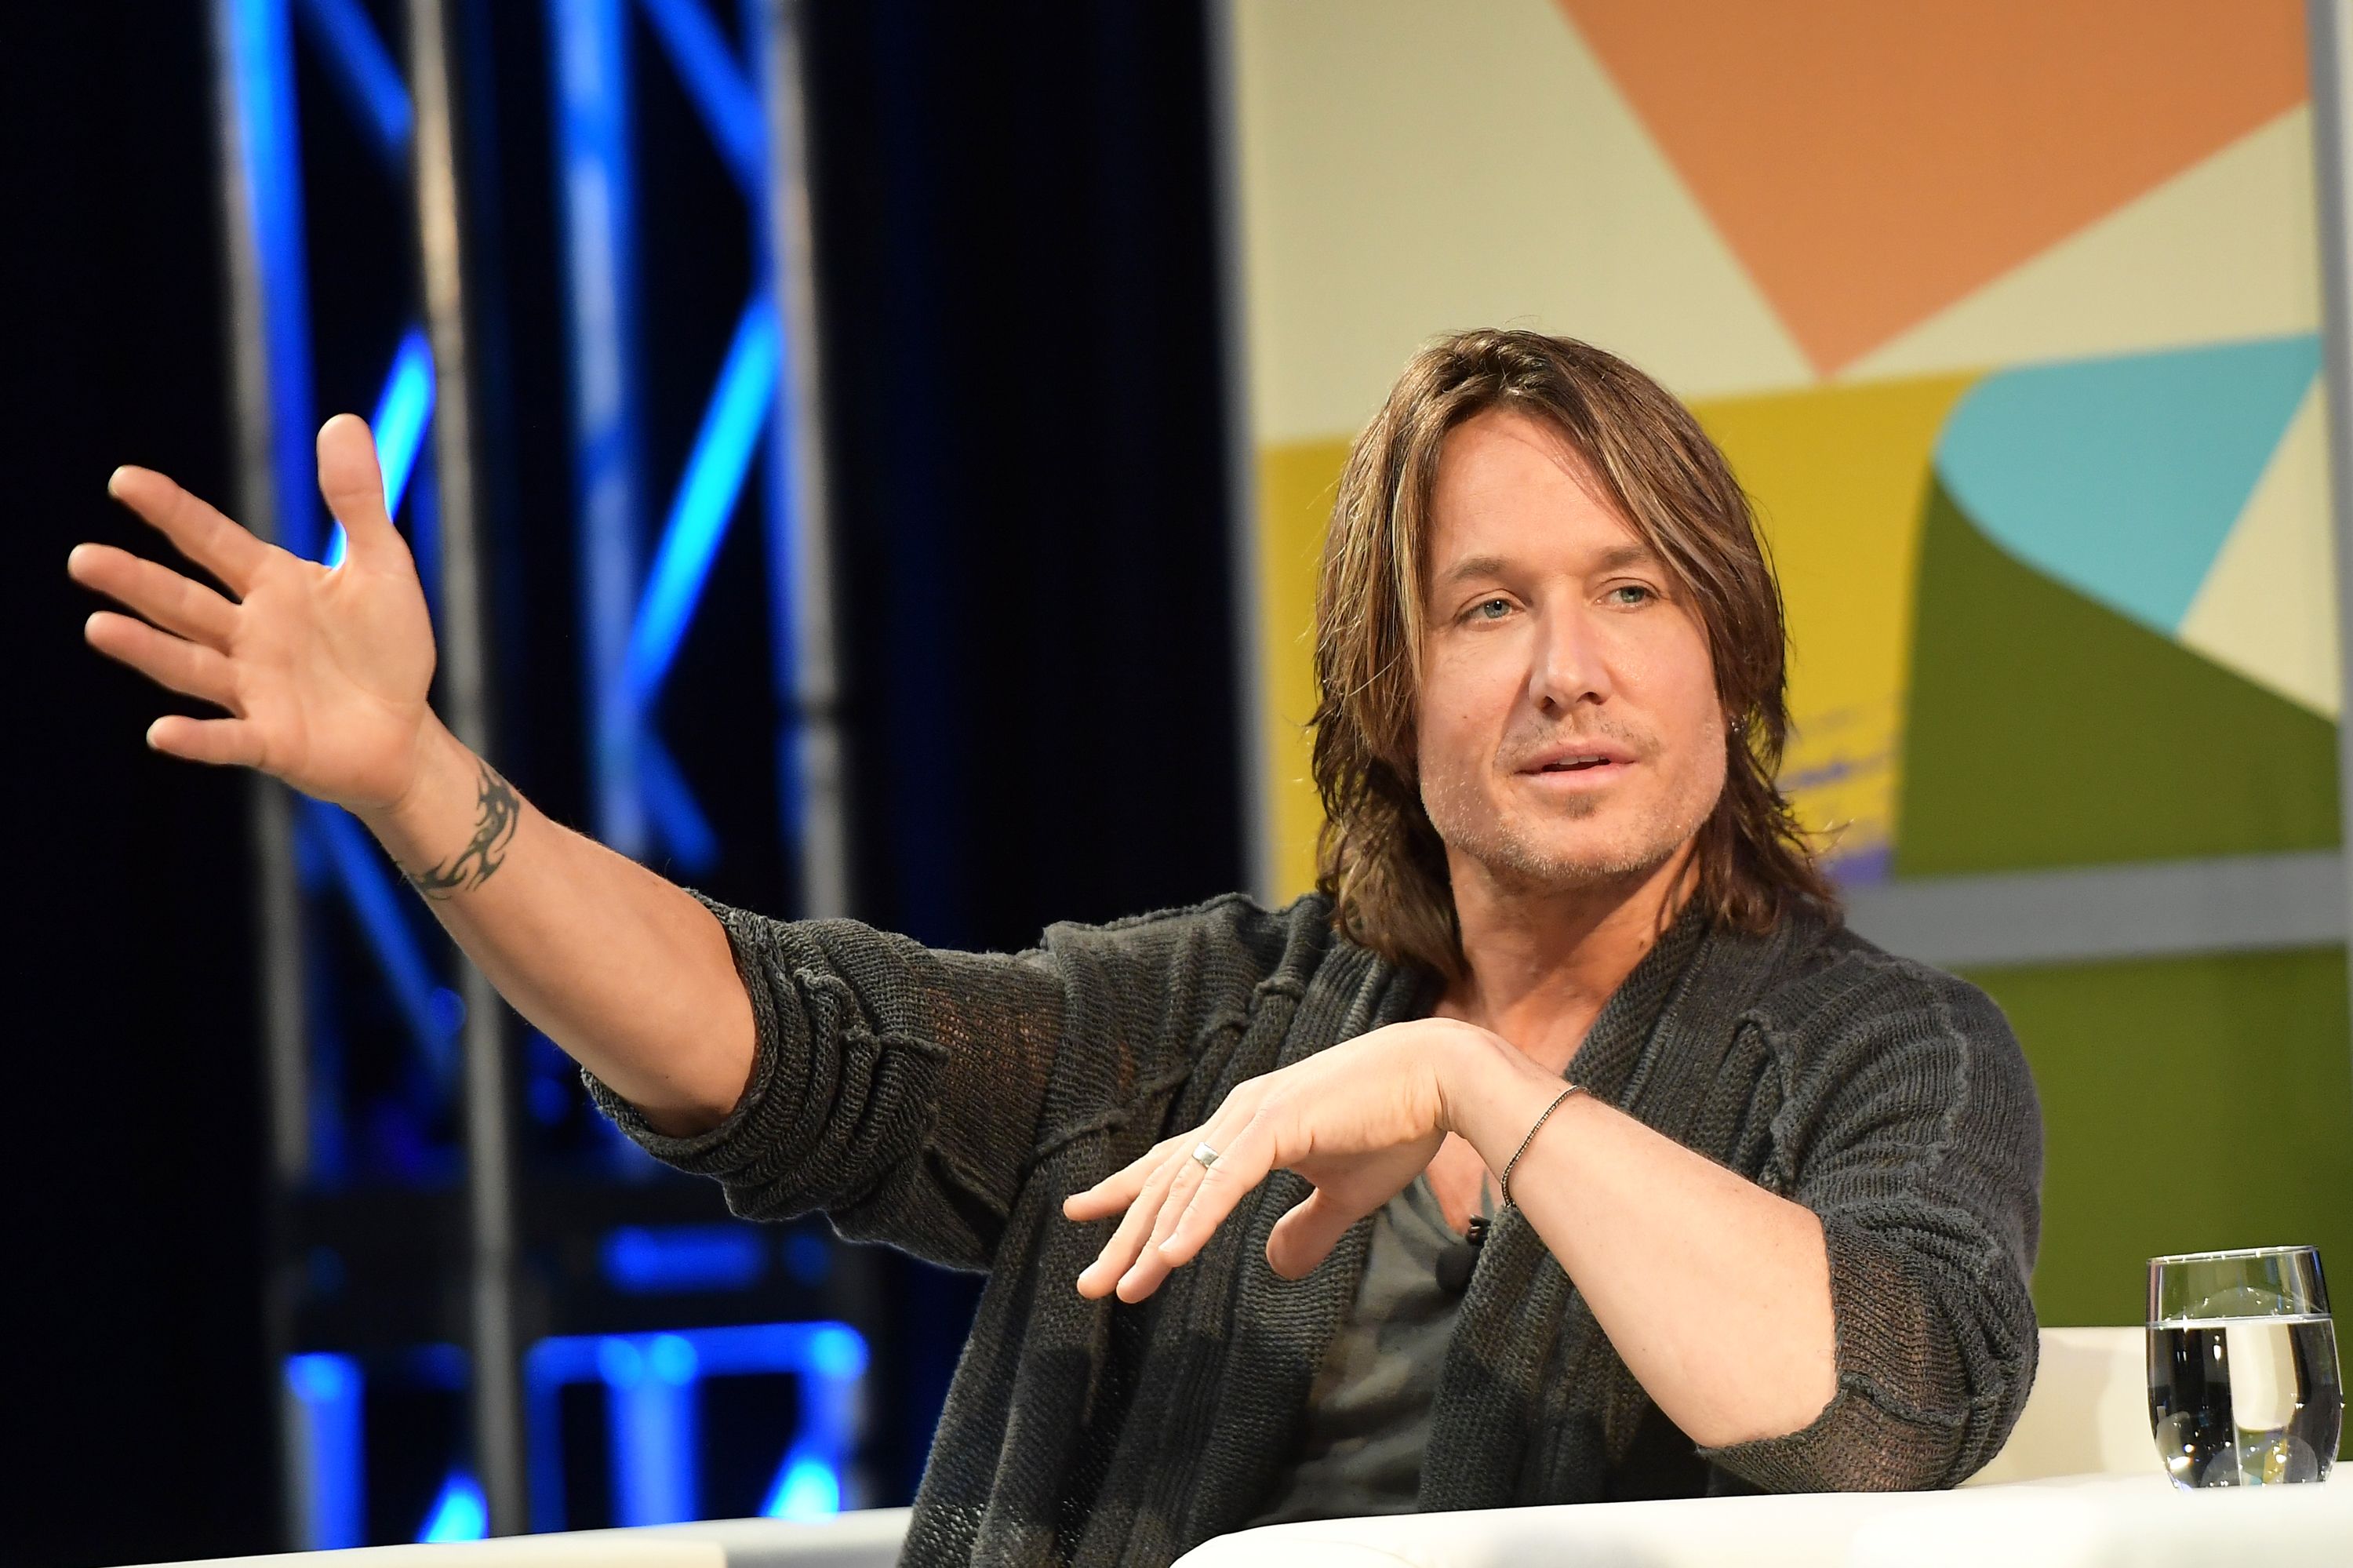 Keith Urban attends A Conversation with Keith Urban 2018 SXSW Conference and Festivals at Austin Convention Center on March 16, 2018 in Austin, Texas | Photo: Getty Images